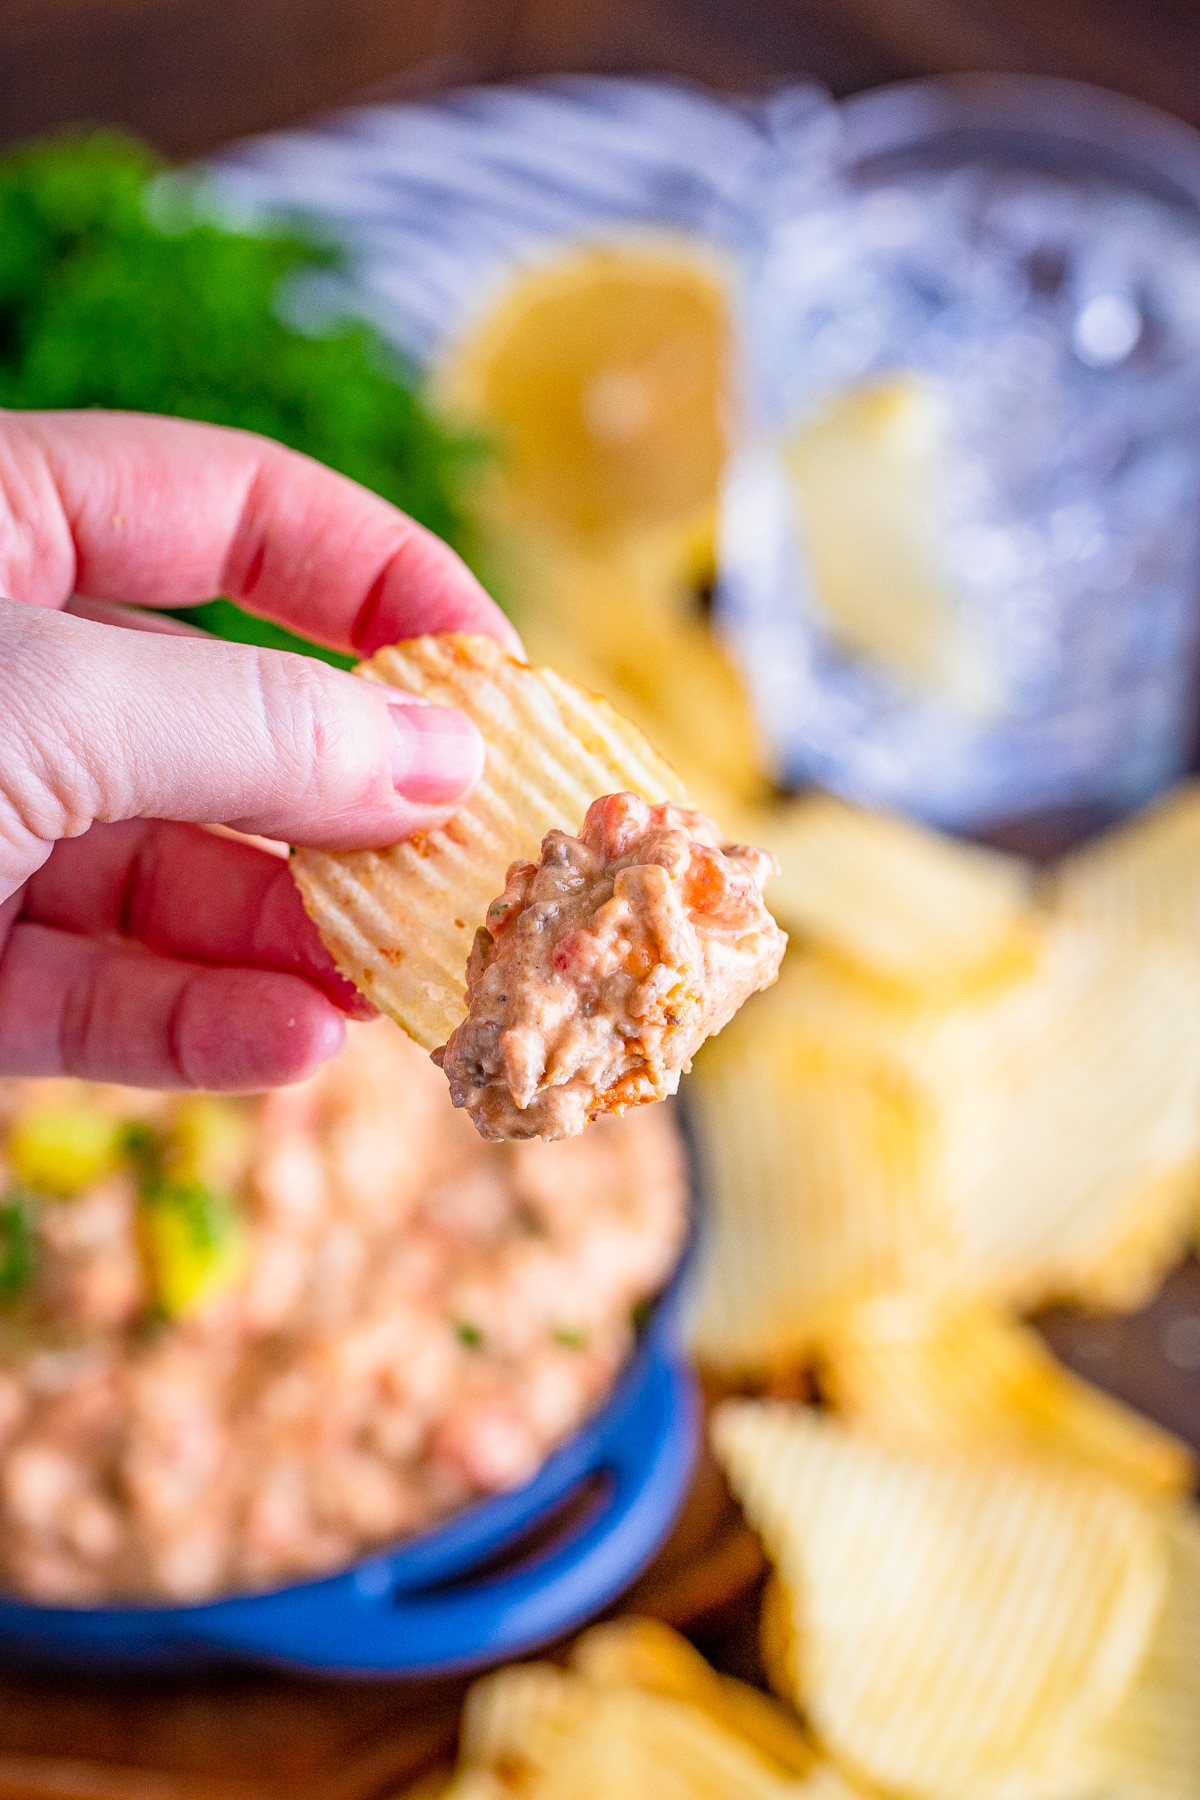 a hand holding up a chip that has cheeseburger dip on it